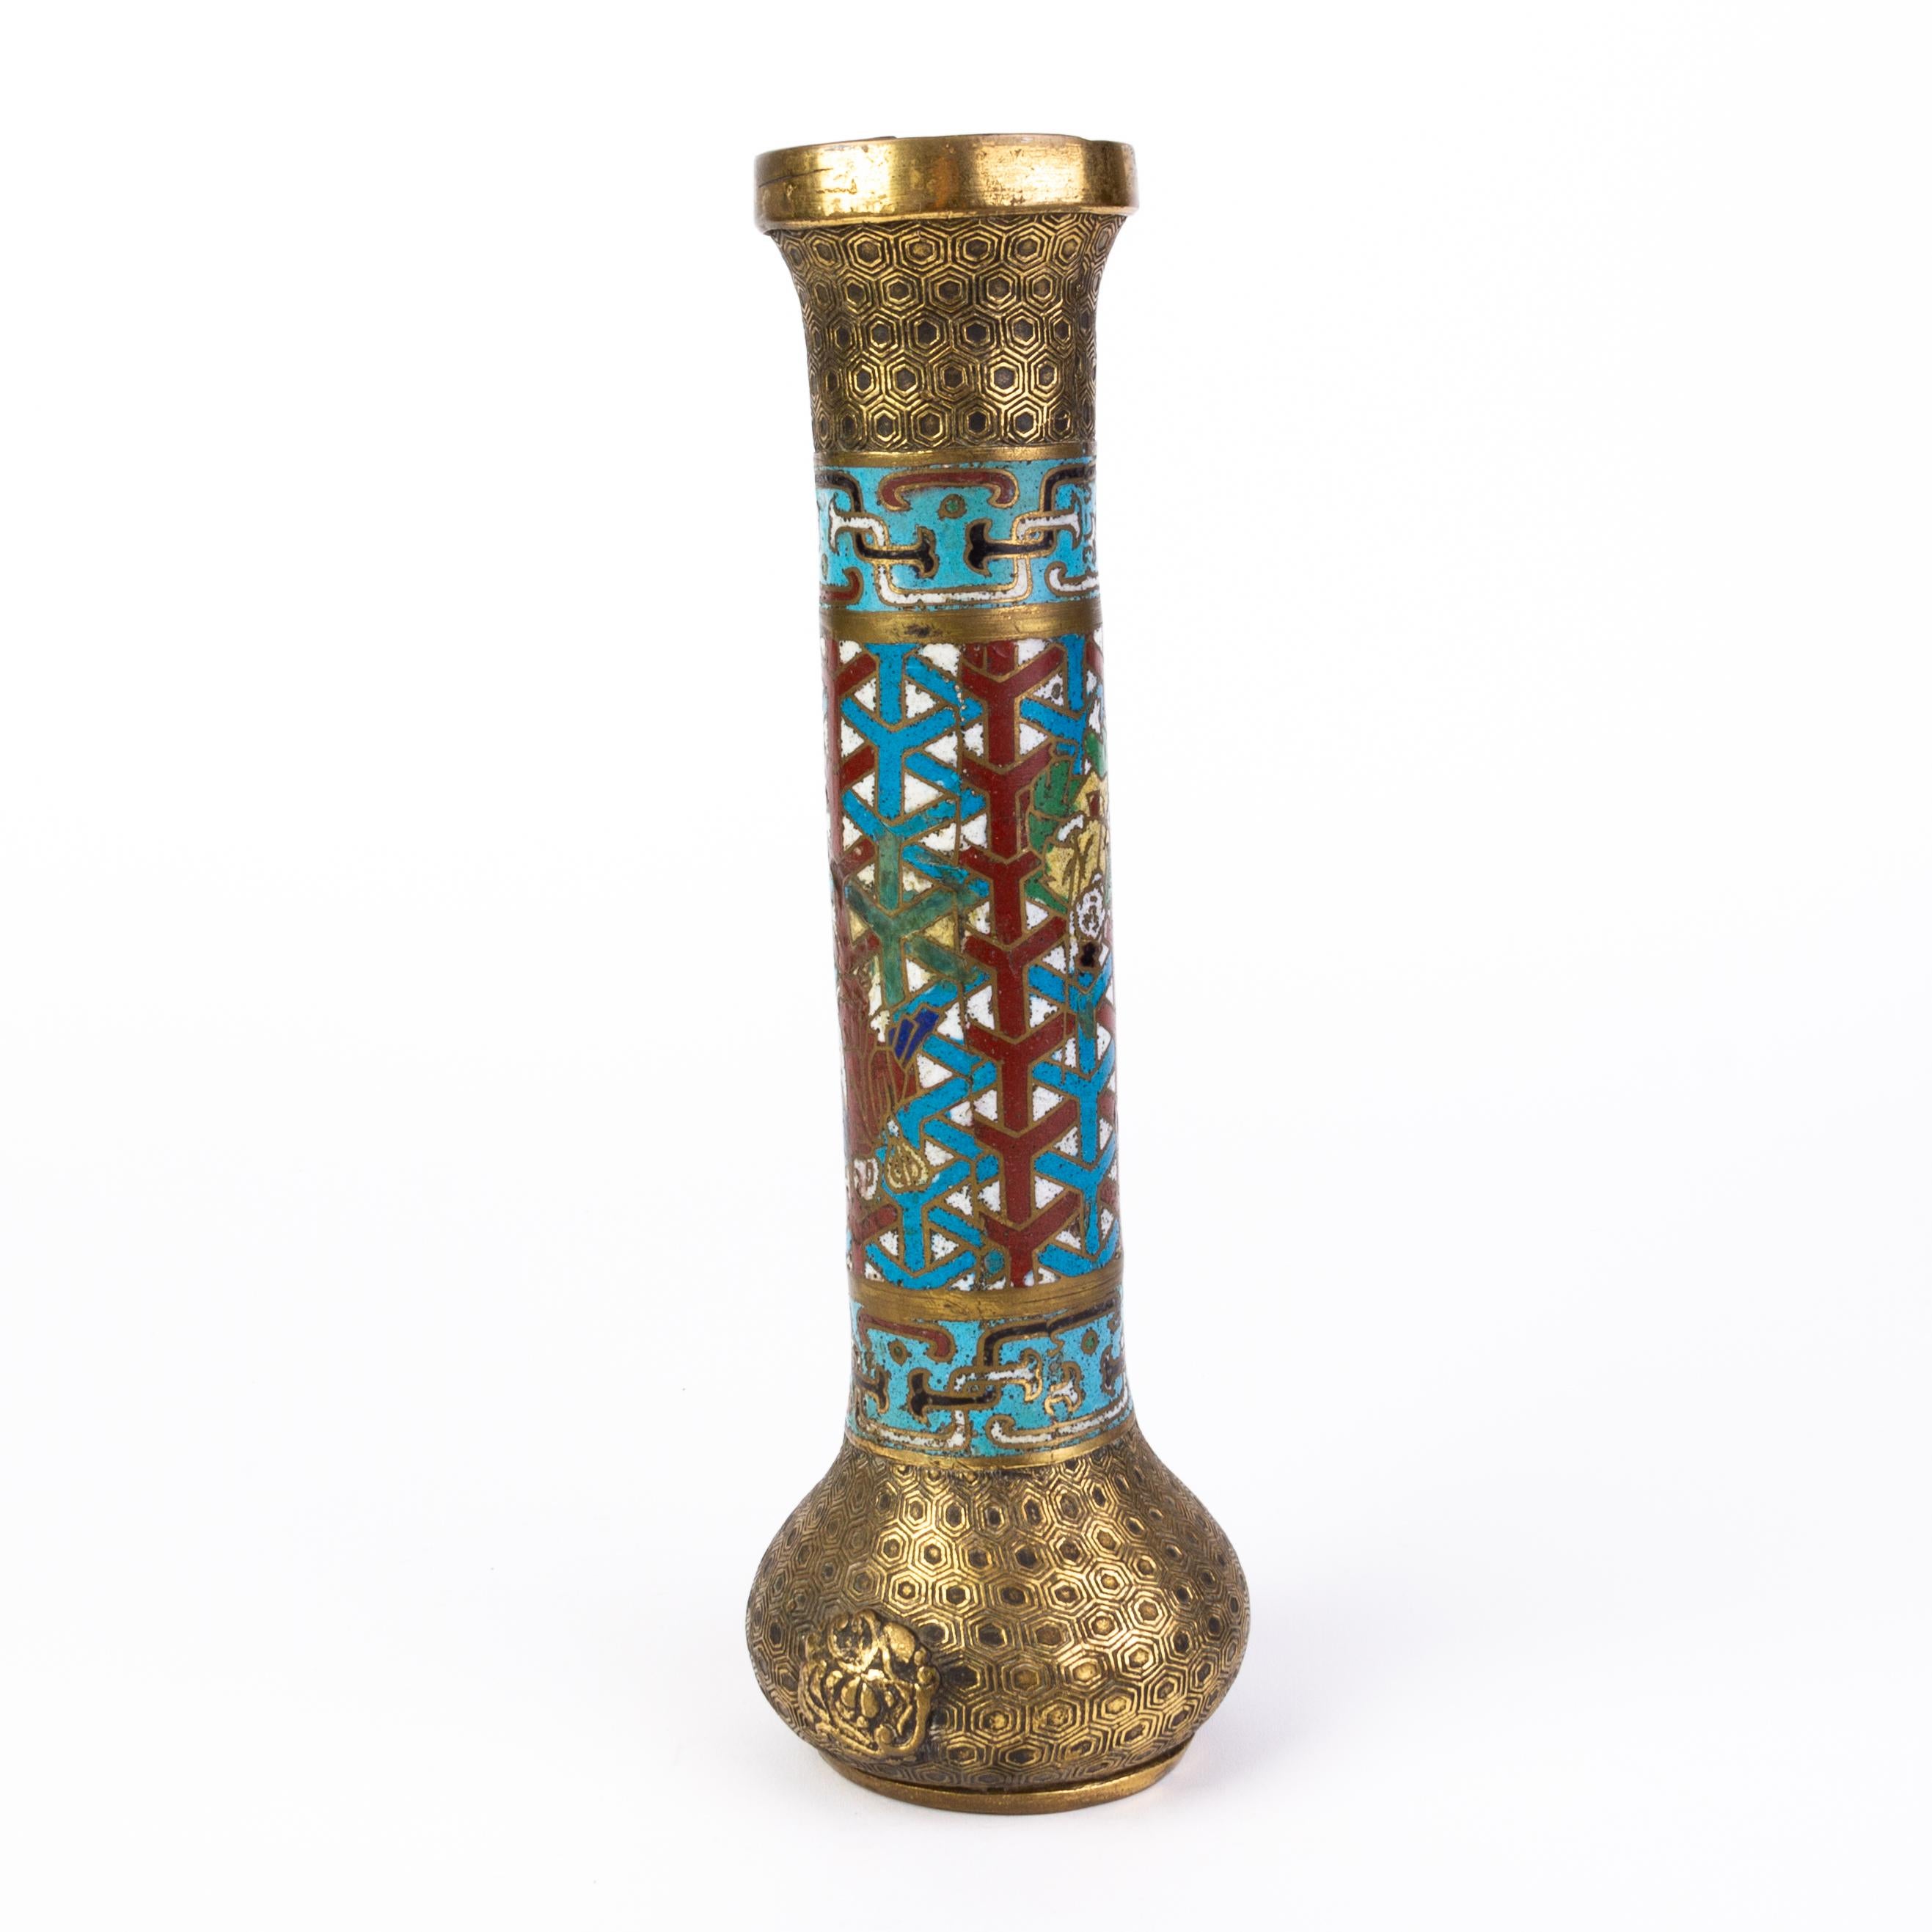 Chinese cloisonne bronze vase.
From a private collection.
Free international shipping.